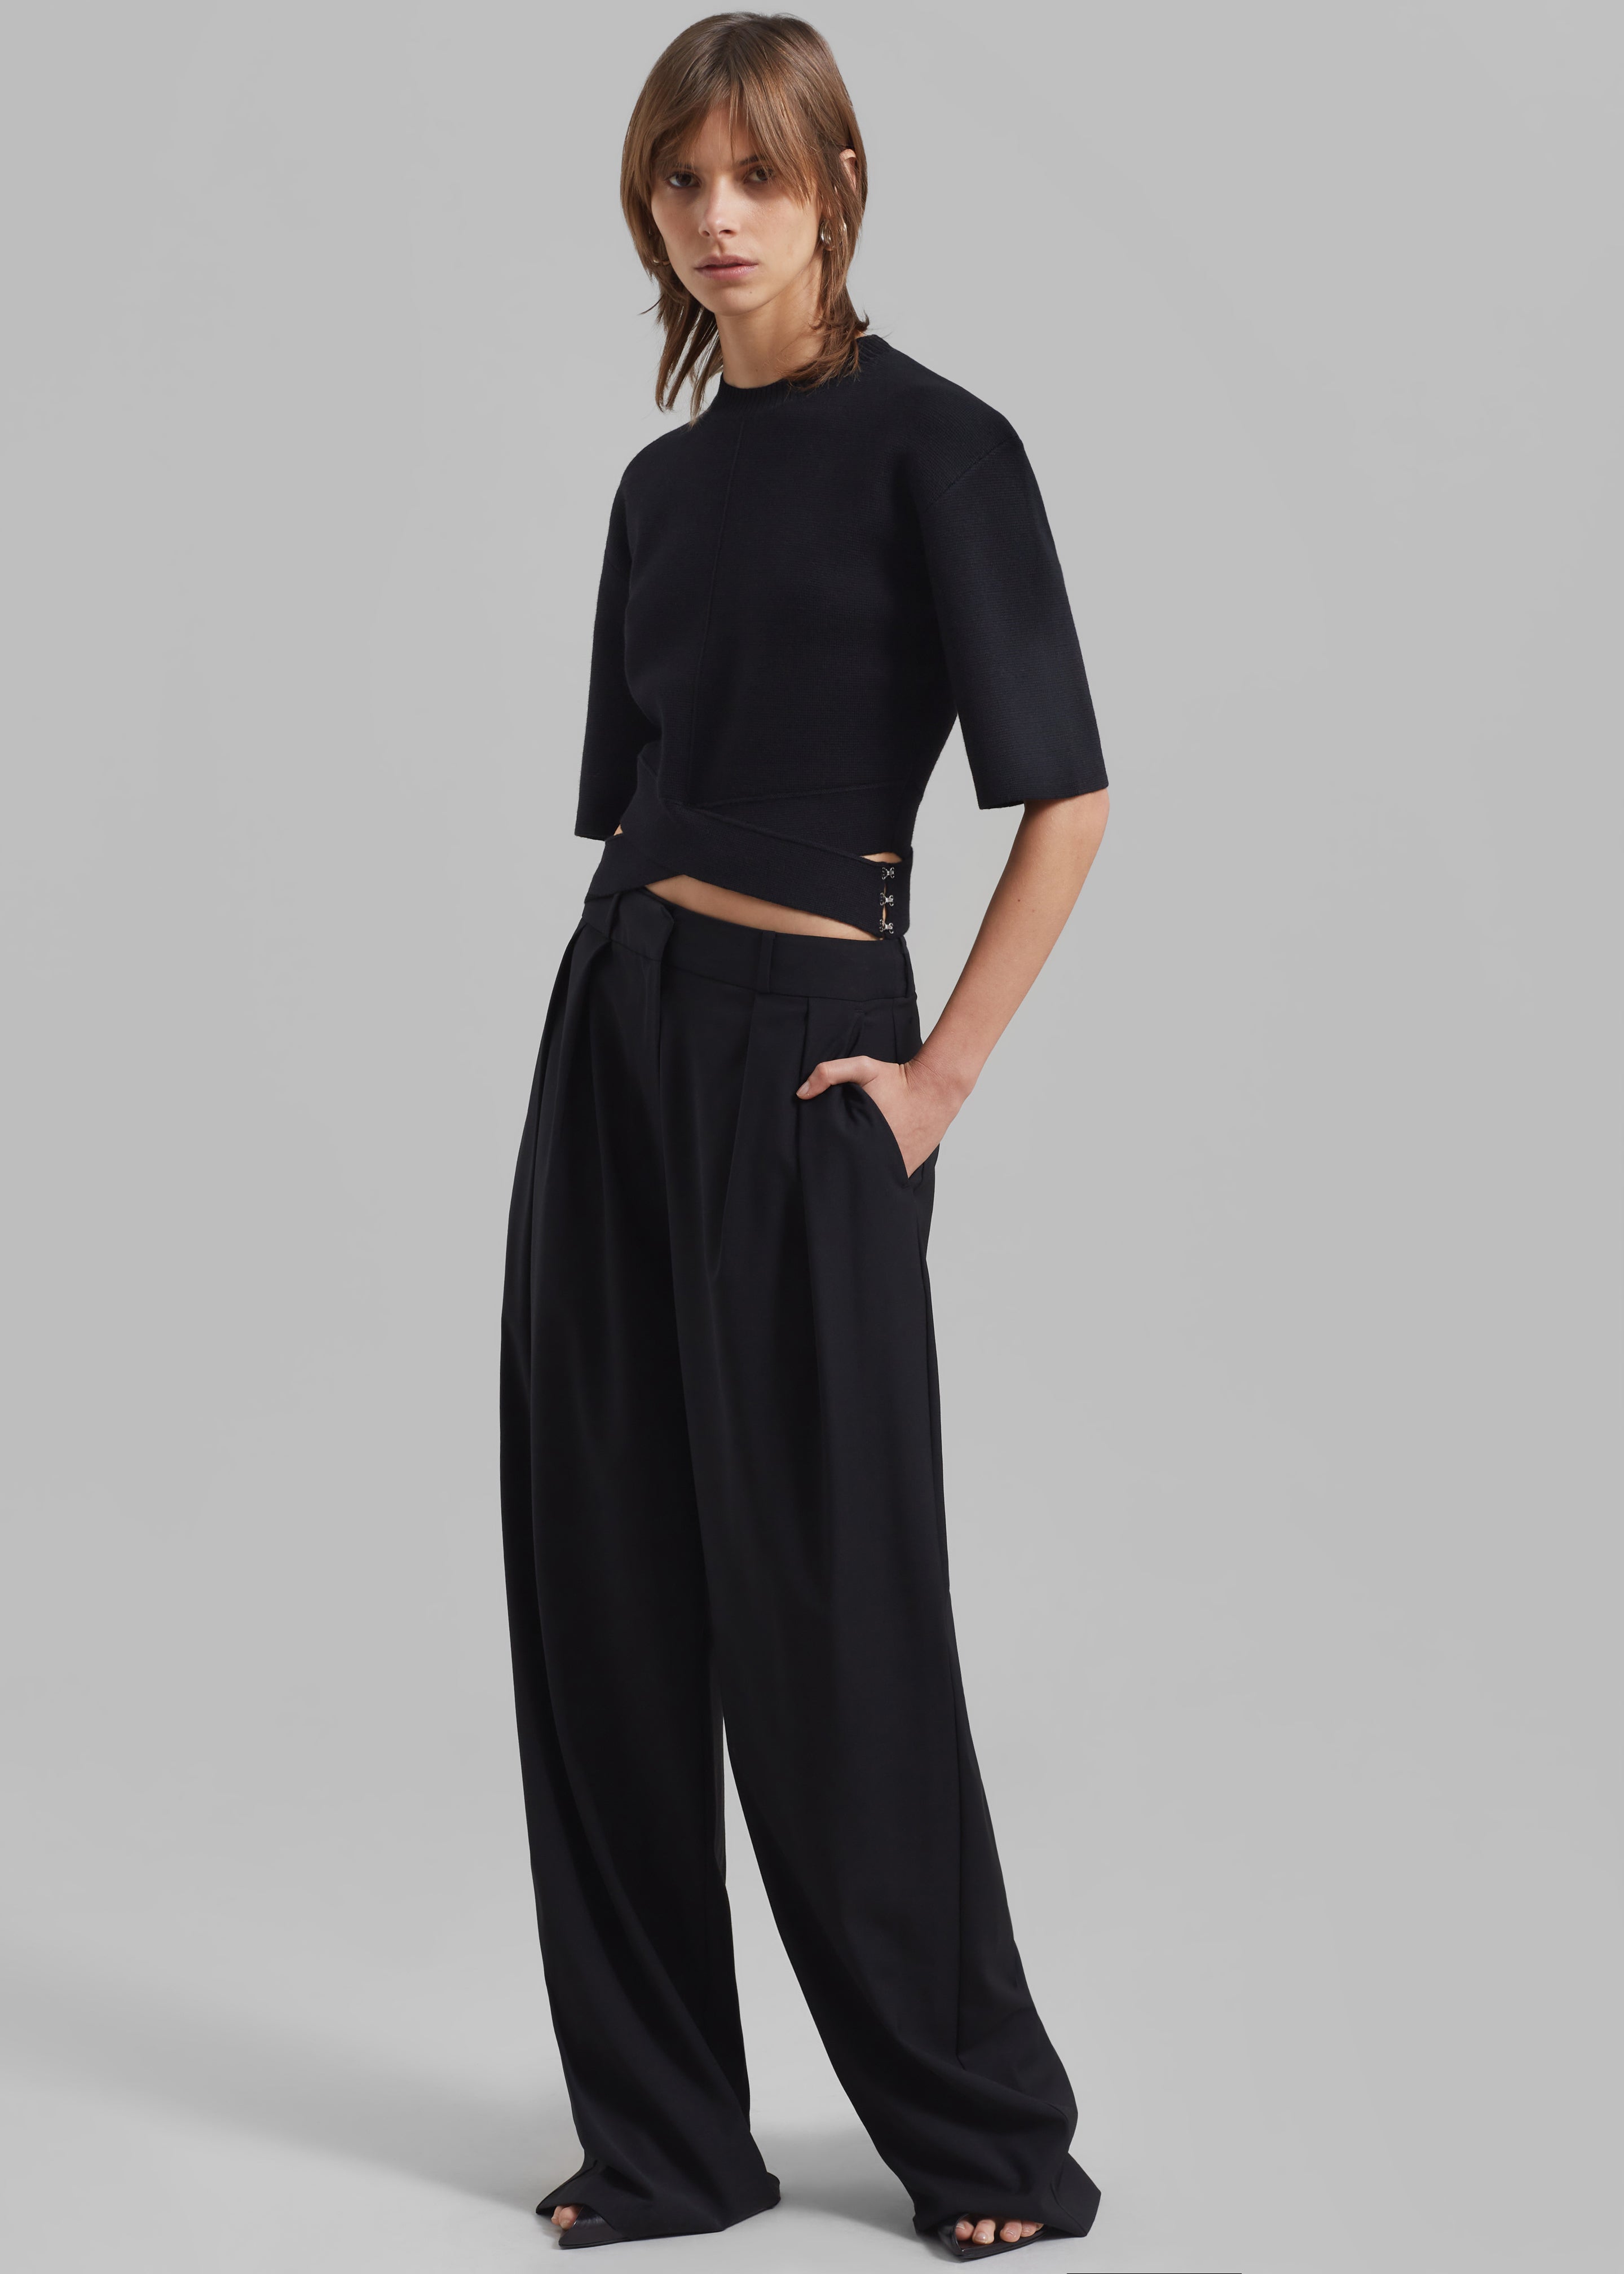 Ripley Pleated Trousers - Black